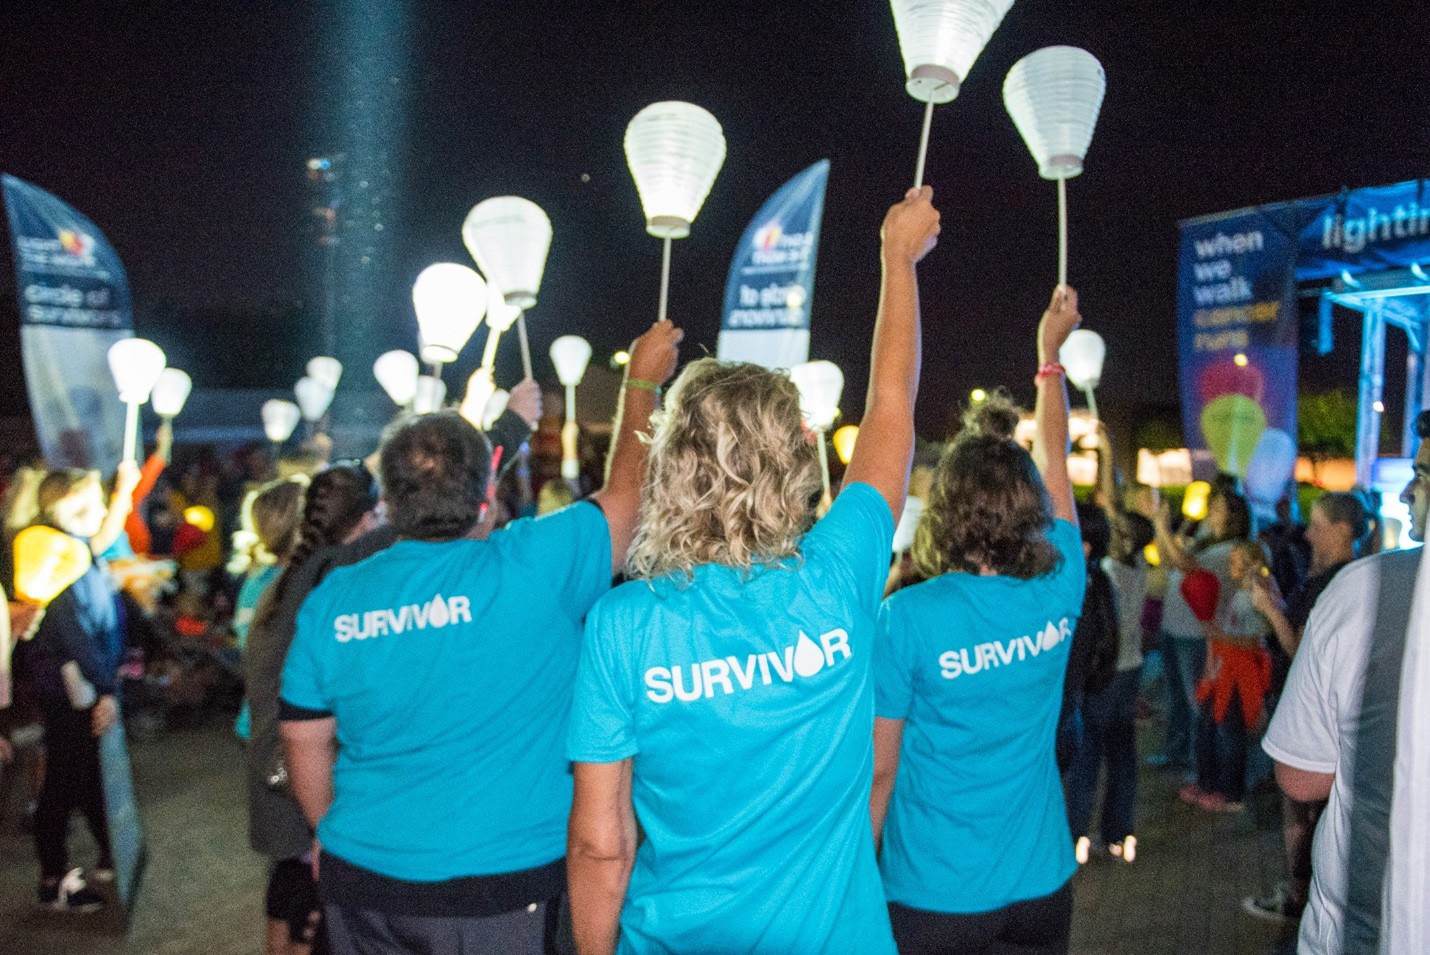 Blood cancer survivors join together in the Circle of Survivors at a Light The Night event.